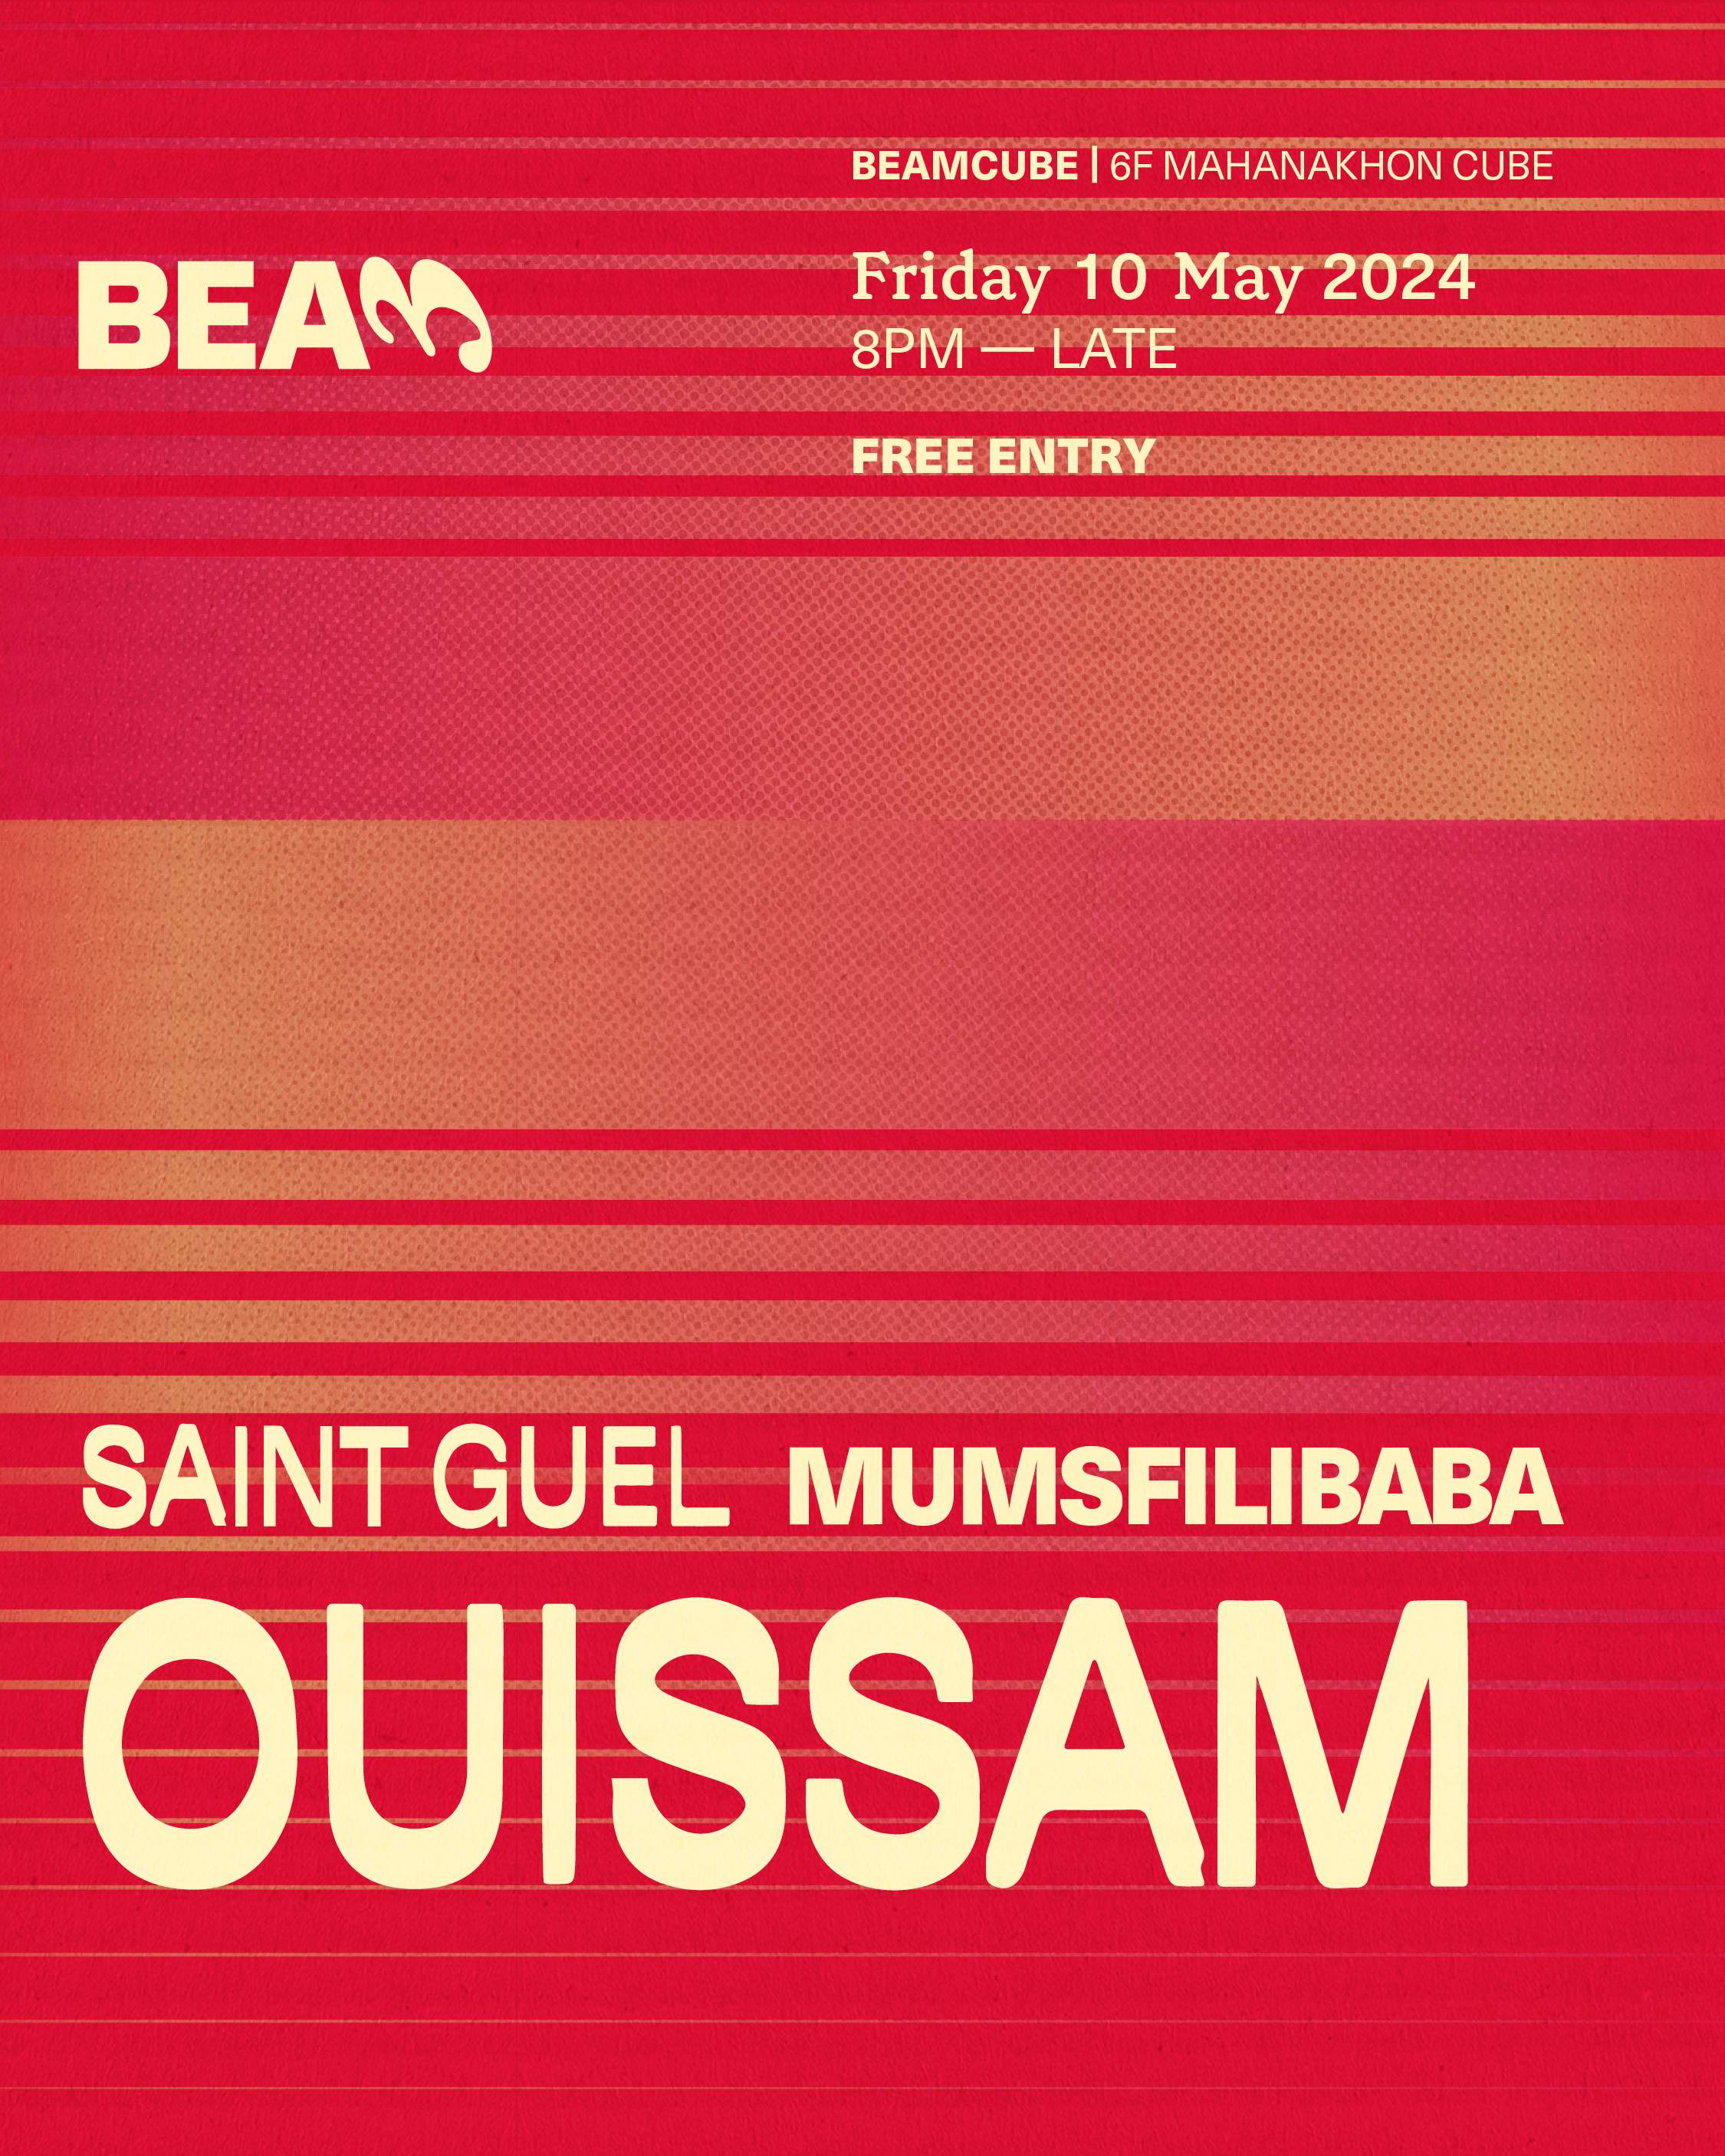 Beamcube invites Ouissam & Saint Guel - Página frontal